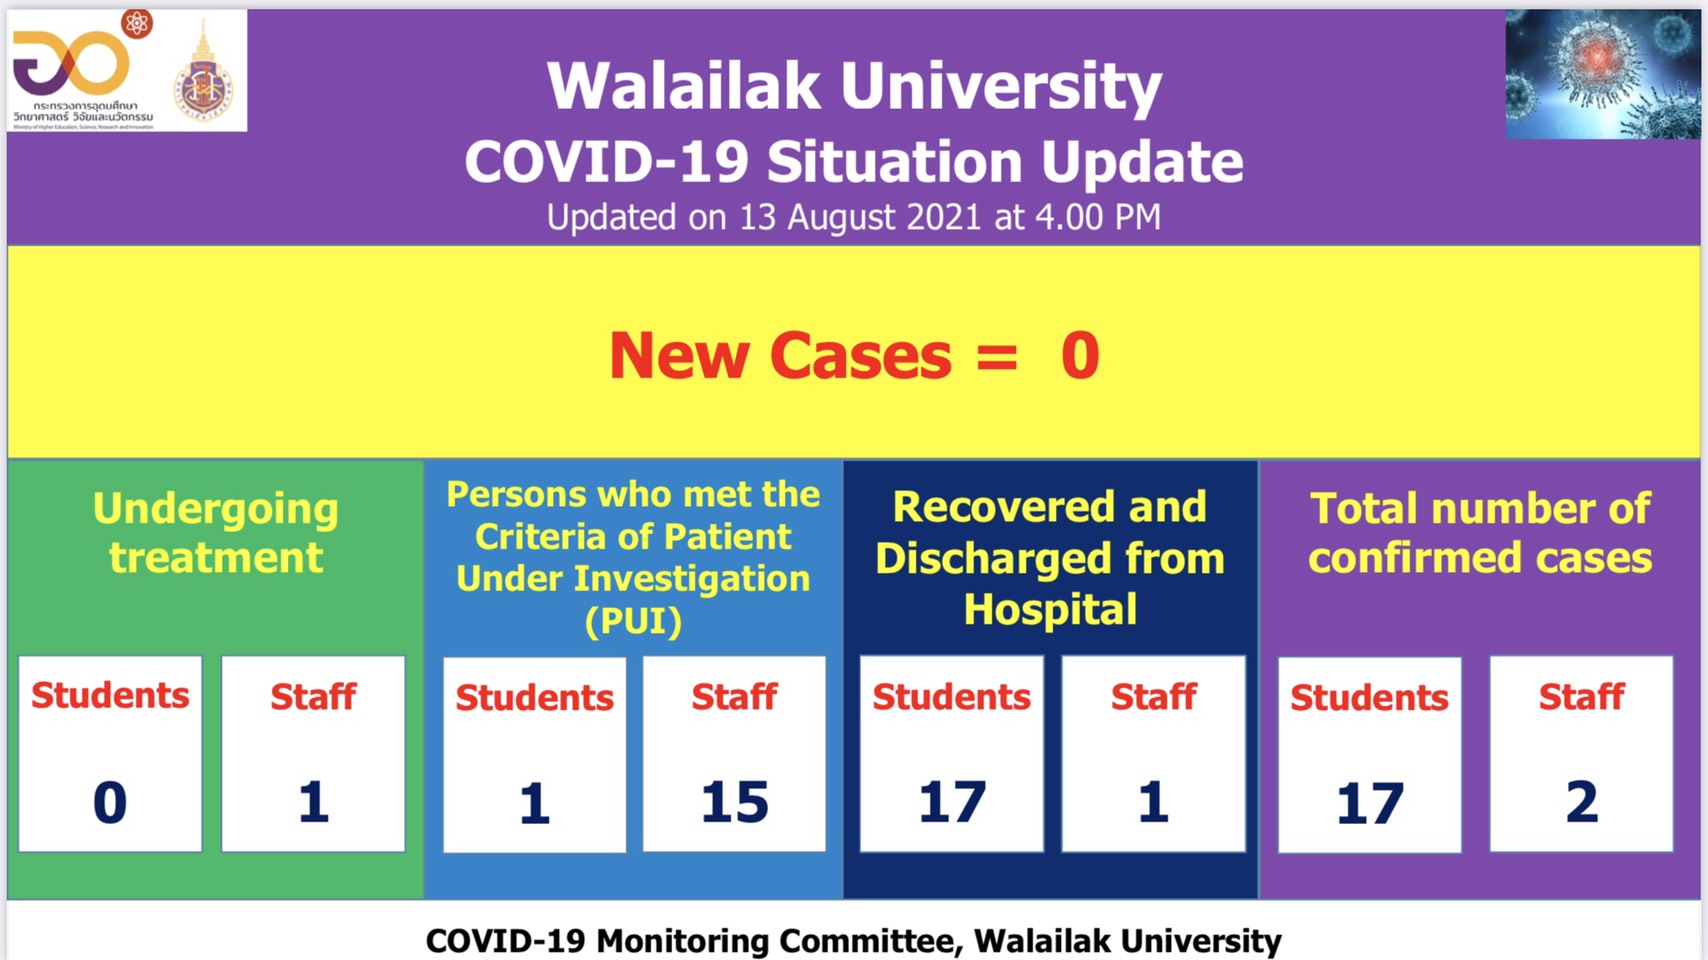 Covid-19 Situation Report of Walailak University - 13 August, 2021